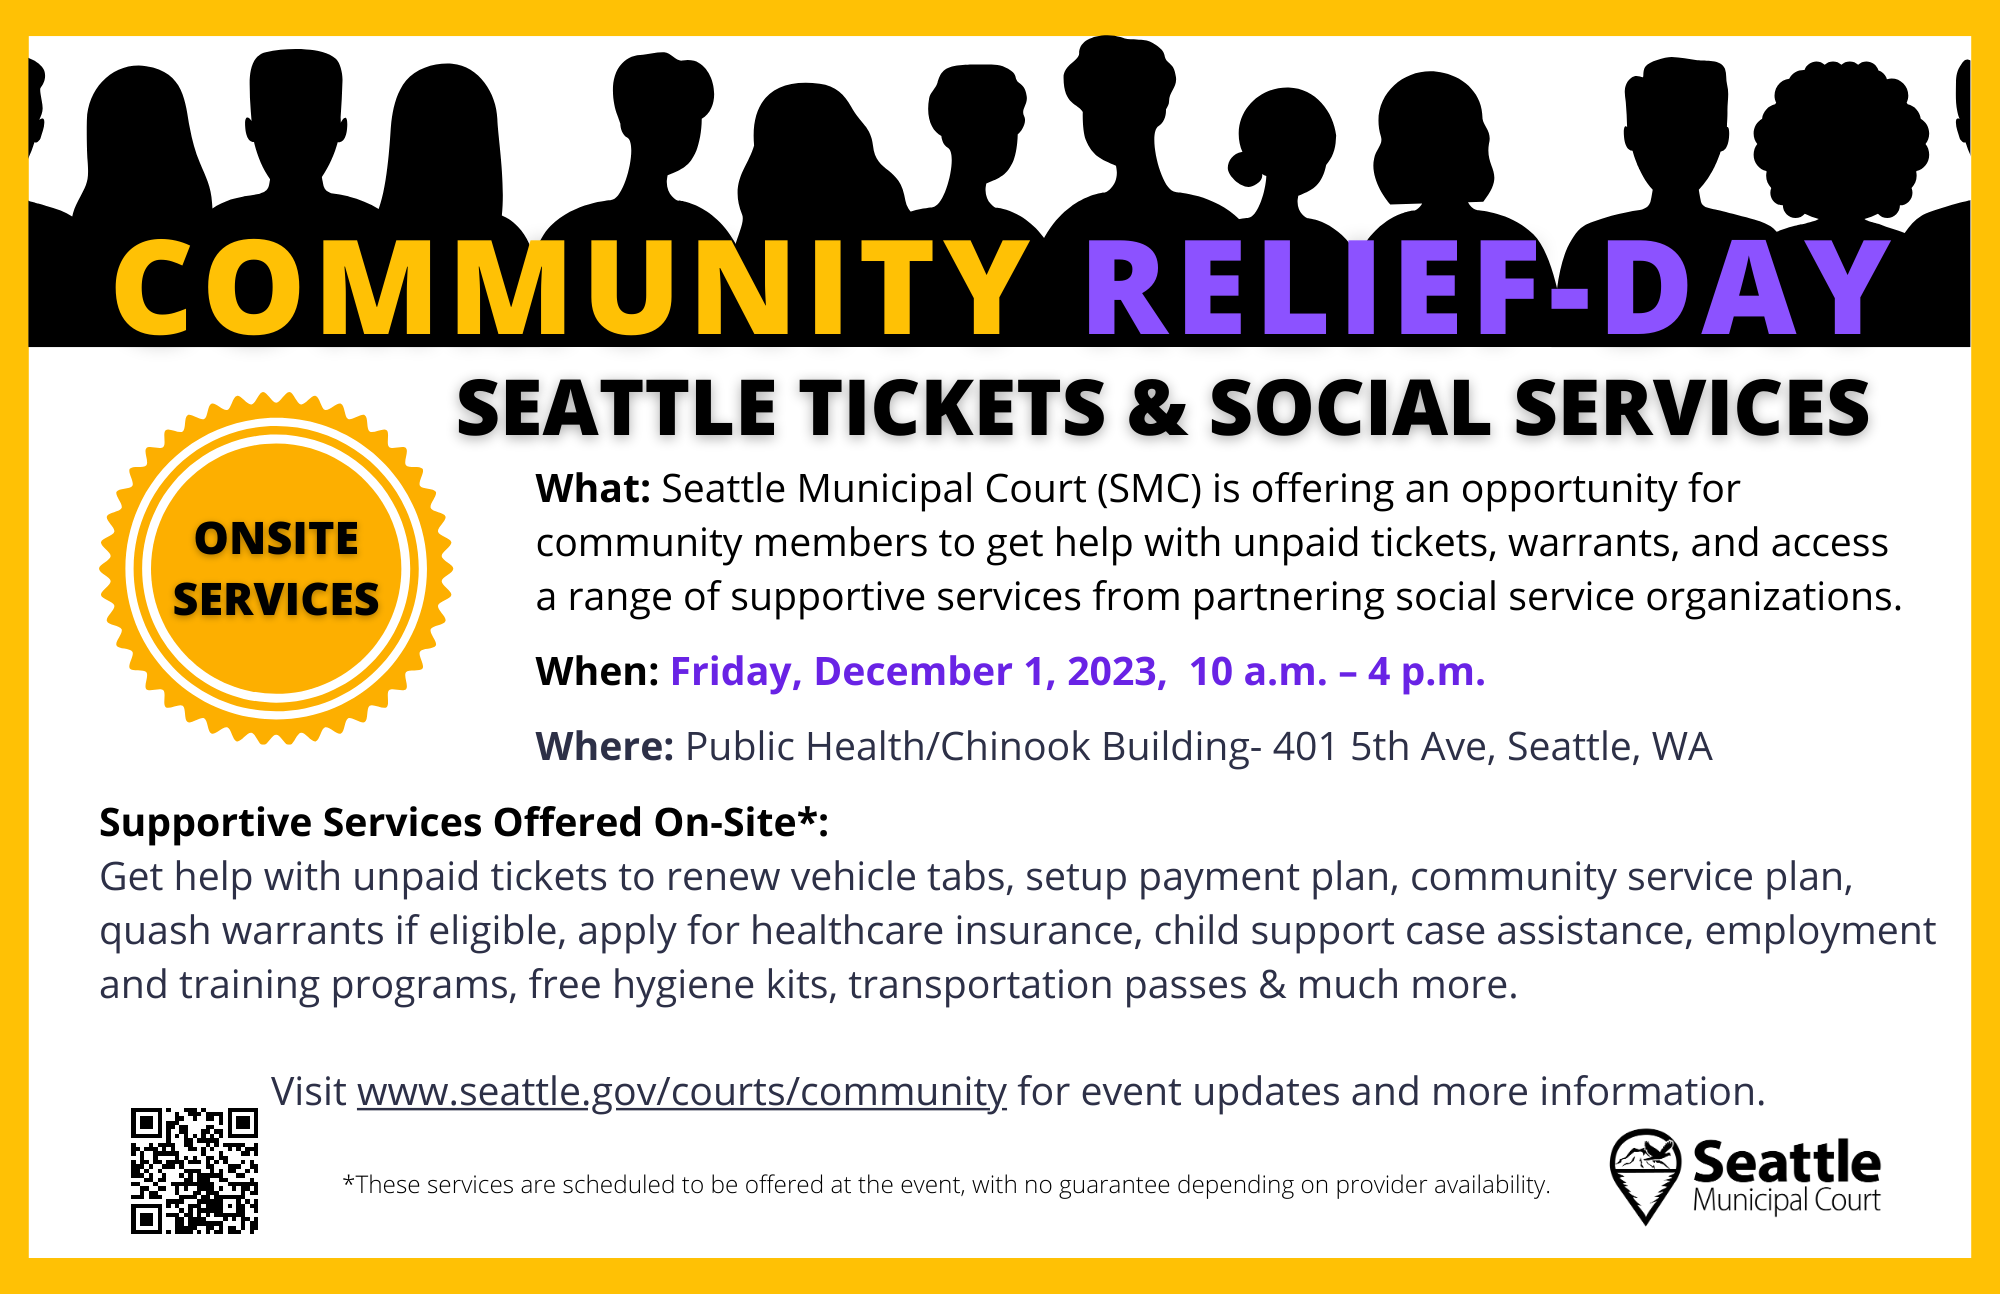 Community Relief Day flyer